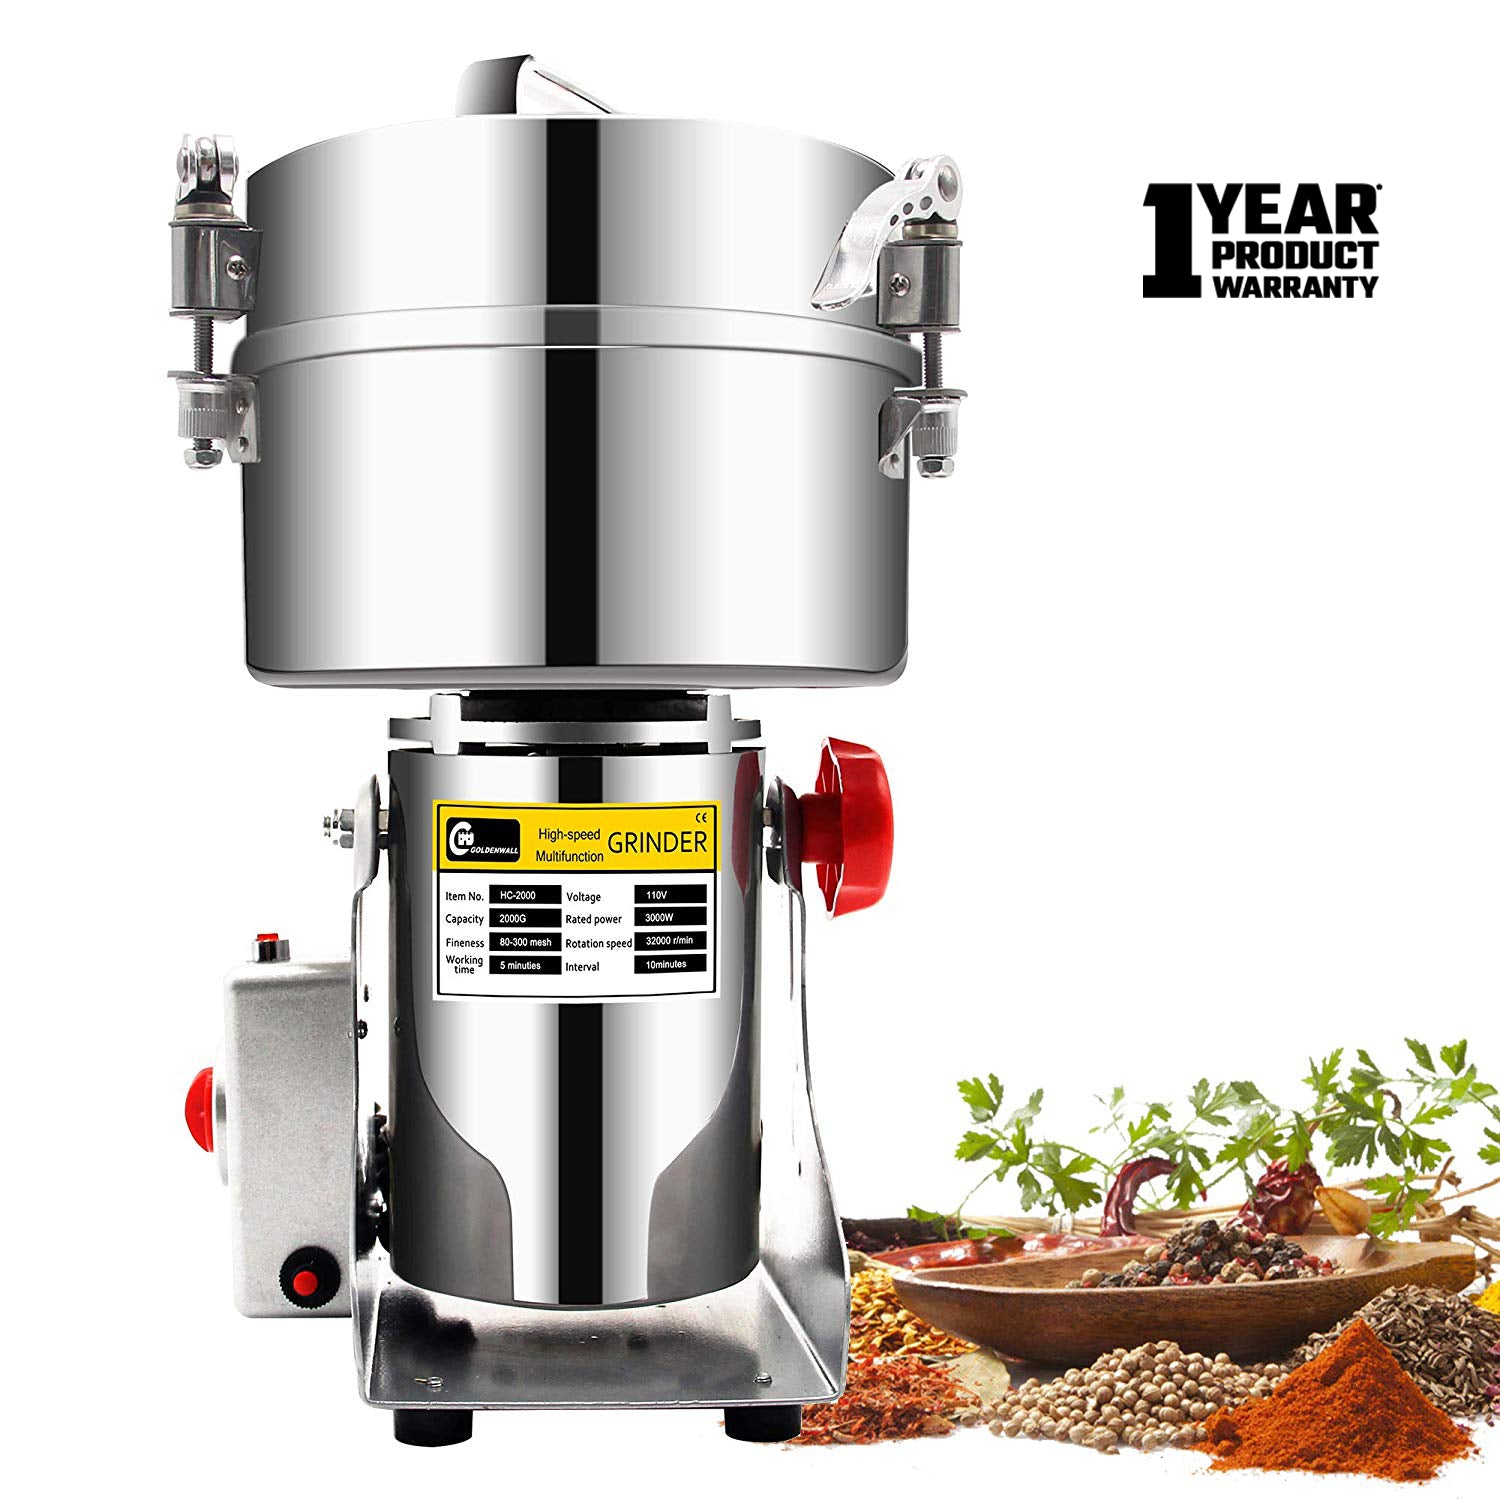 Grains Spices Hebals Cereals Coffee Dry Food Grinder Mill Grinding Machine  Gristmill Flour Crusher From Lewiao321, $1,552.77